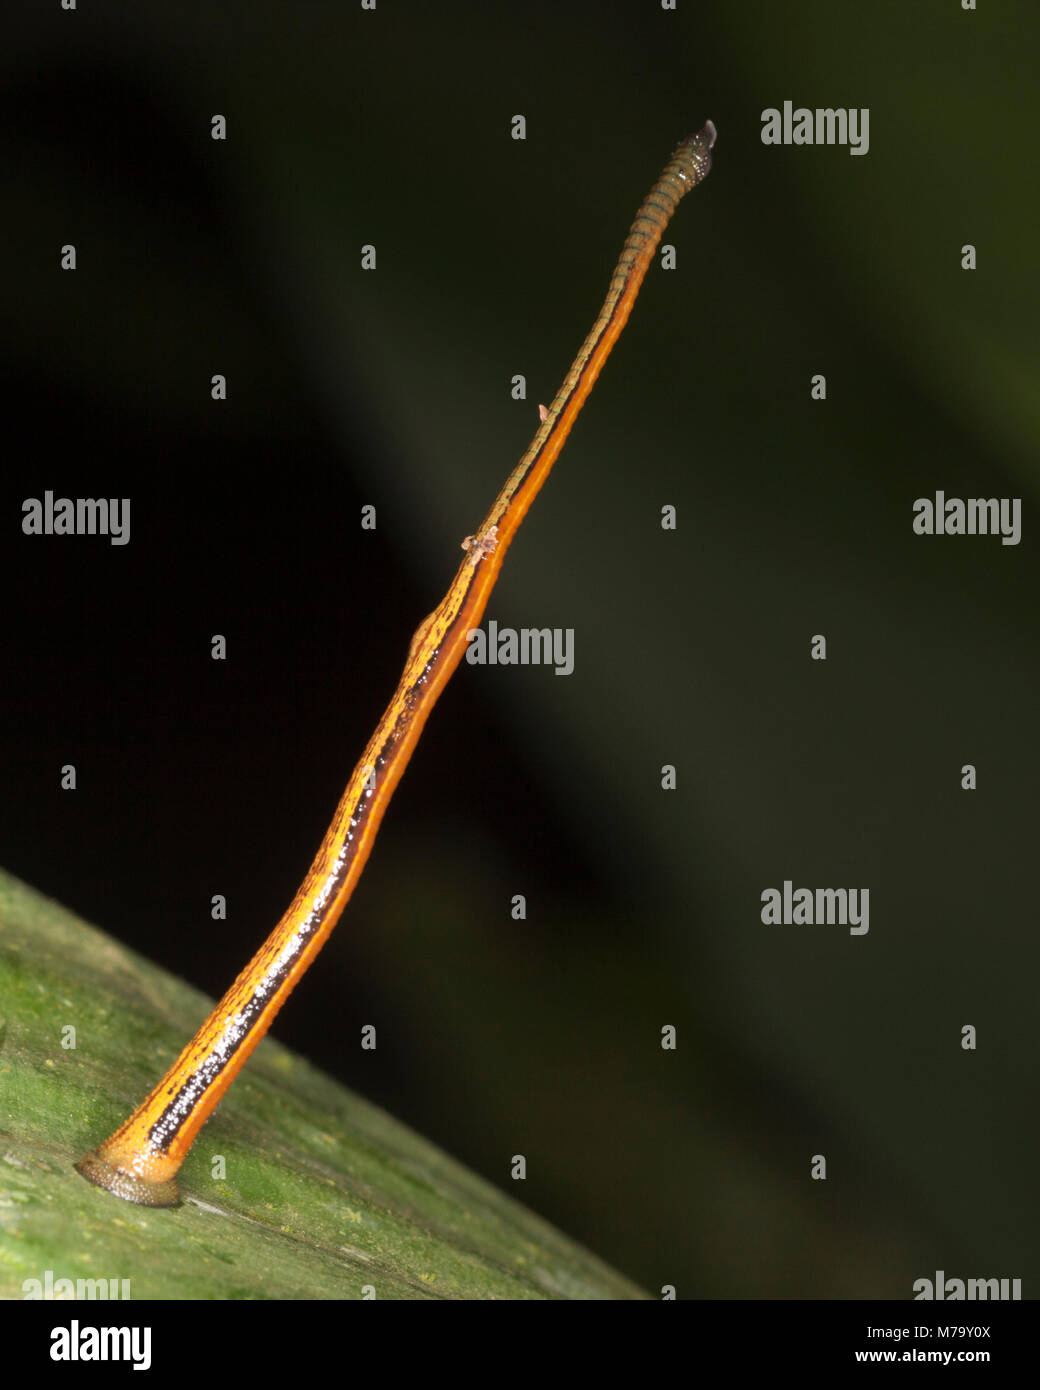 Tiger Leech (Haemadipsa picta) standing on its sucker on a leaf in lowland tropical rainforest waiting for prey Stock Photo